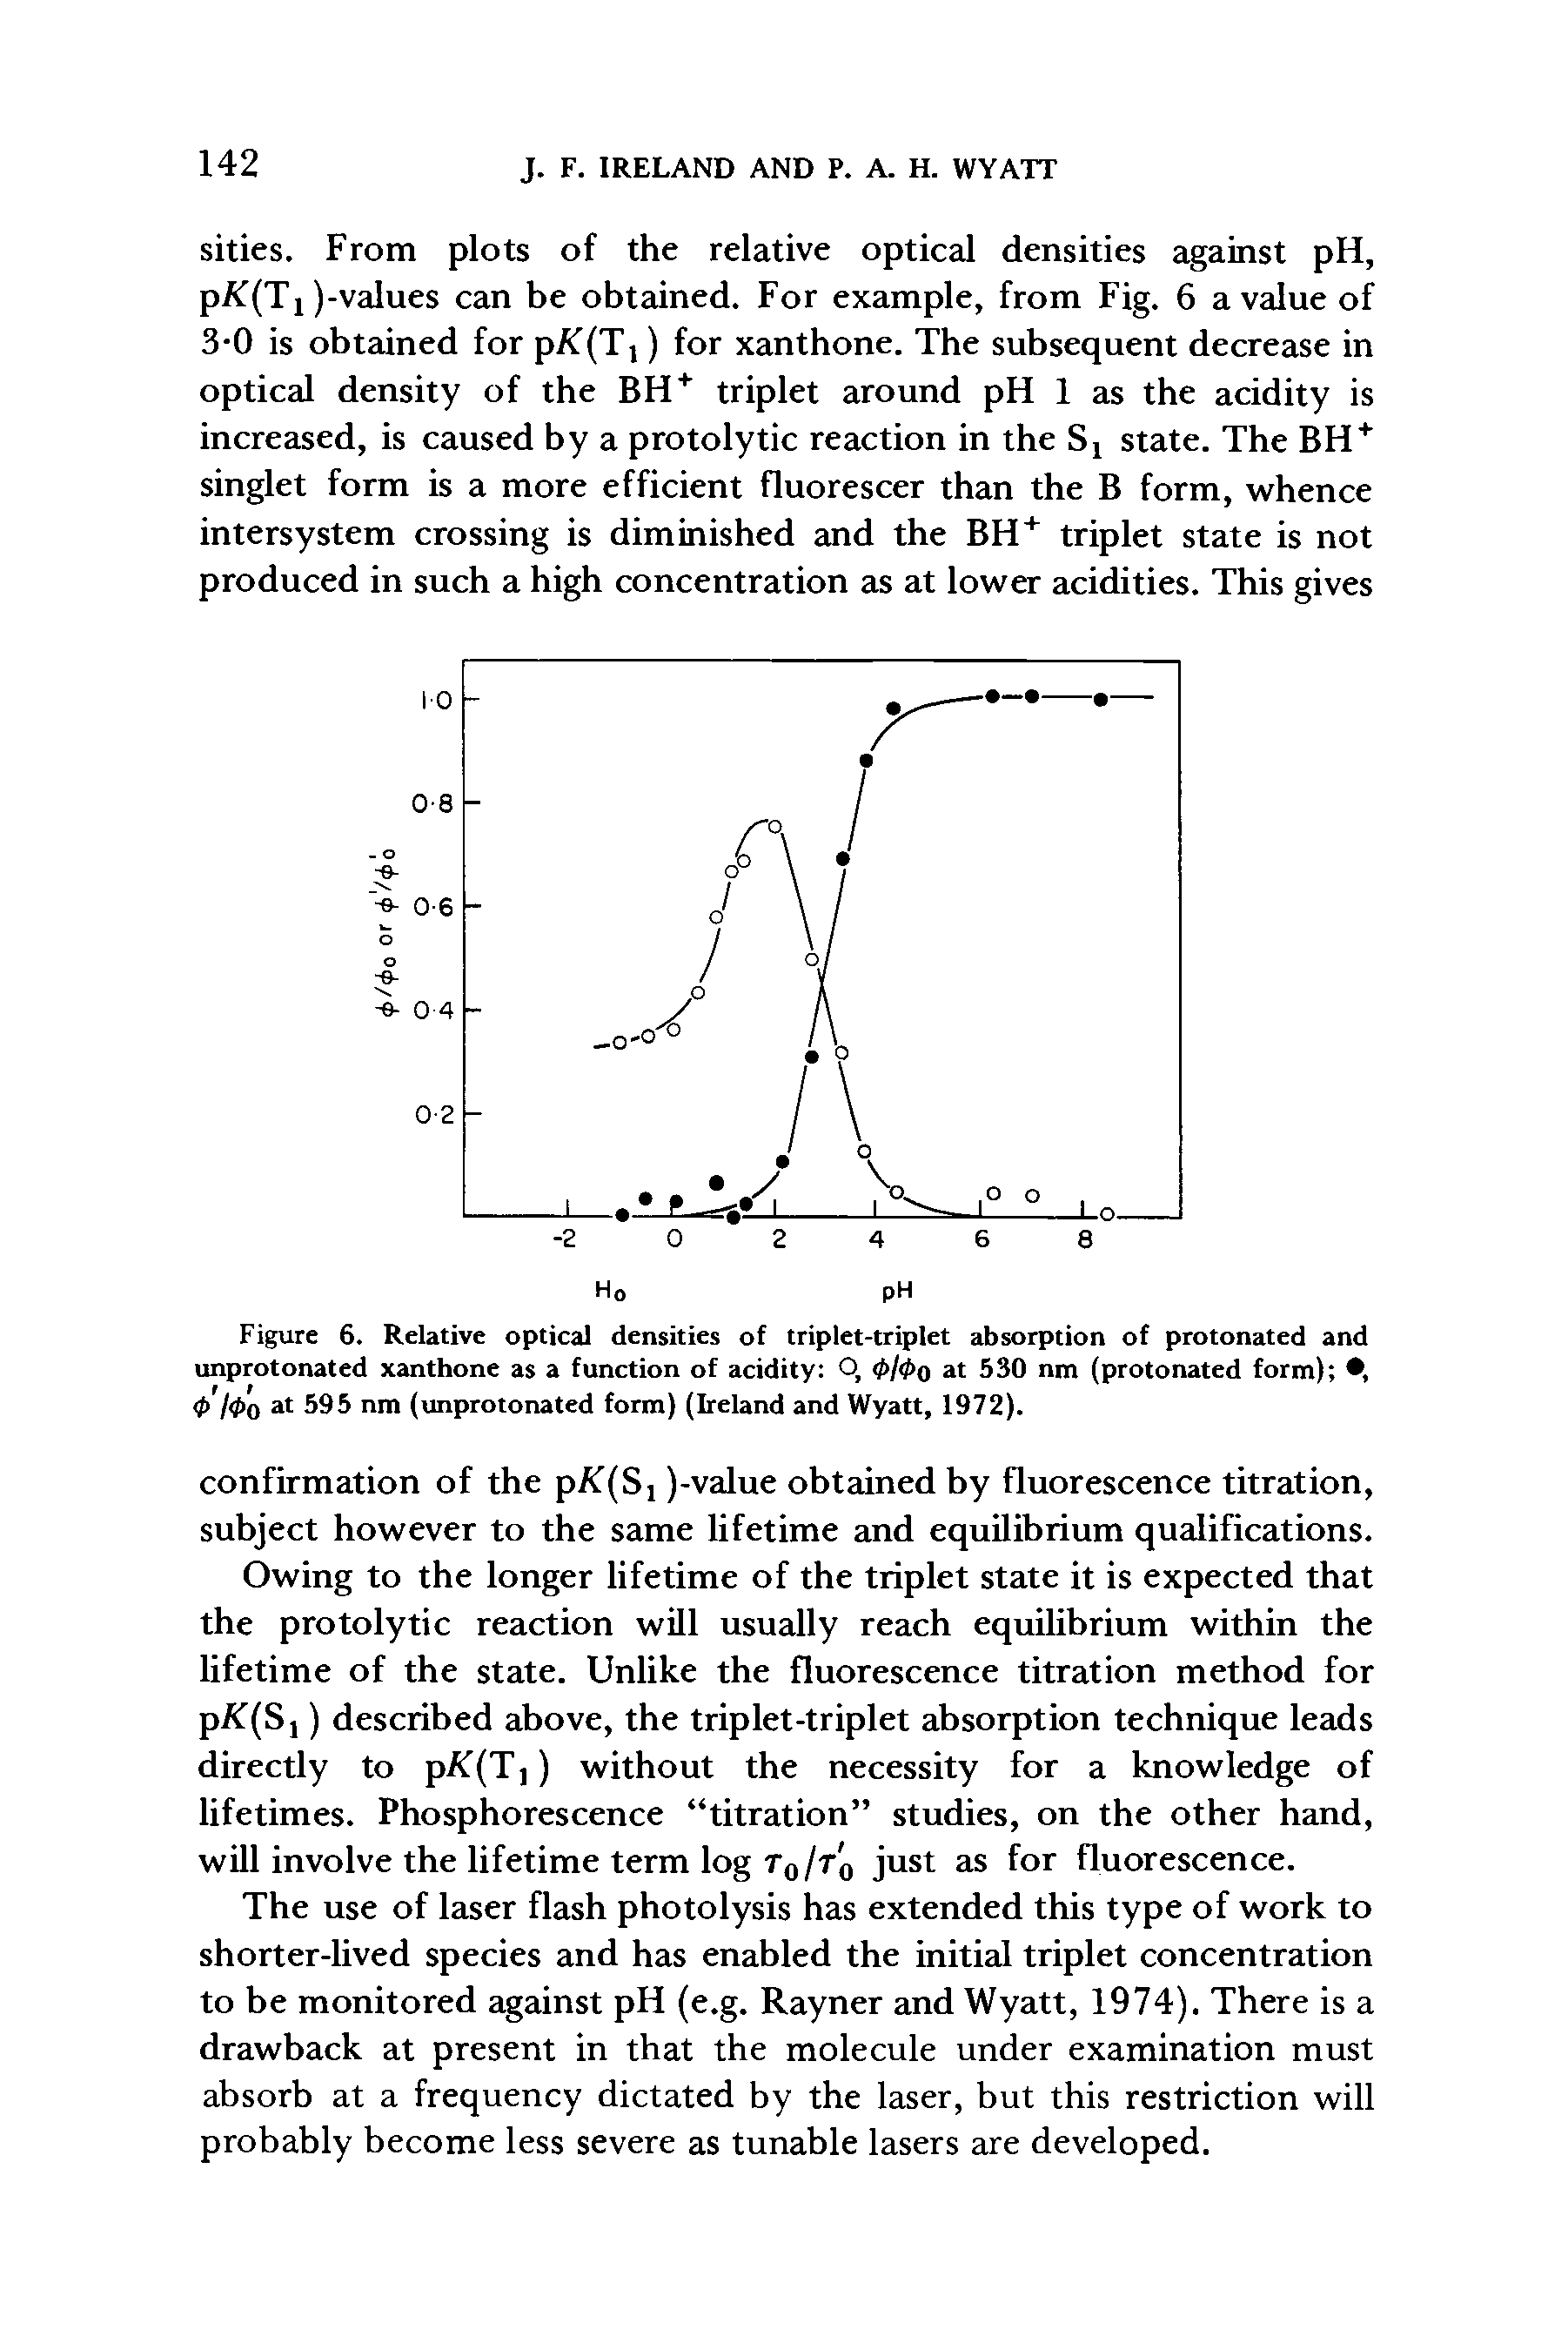 Figure 6. Relative optical densities of triplet-triplet absorption of protonated and unprotonated xanthone as a function of acidity O, at 530 nm (protonated form) , <p l<po at 595 nm (unprotonated form) (Ireland and Wyatt, 1972).